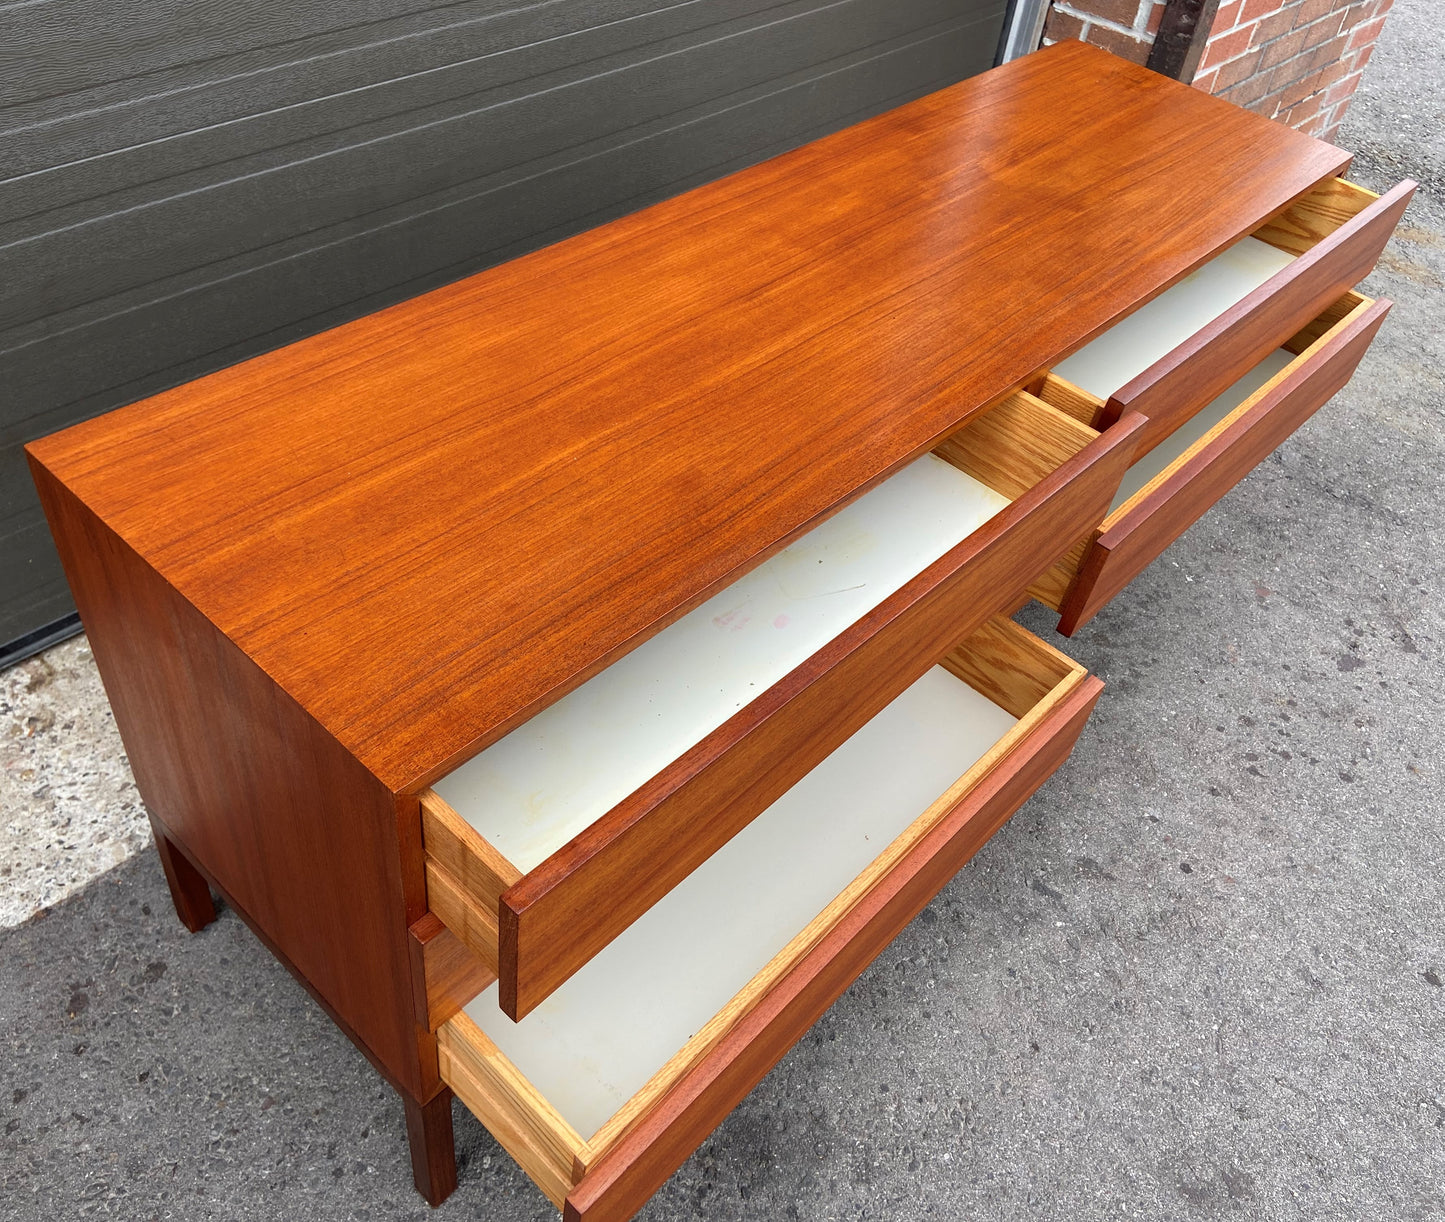 REFINISHED Mid Century Modern Teak Dresser/ TV Console by Reff/ Knoll, 63" PERFECT